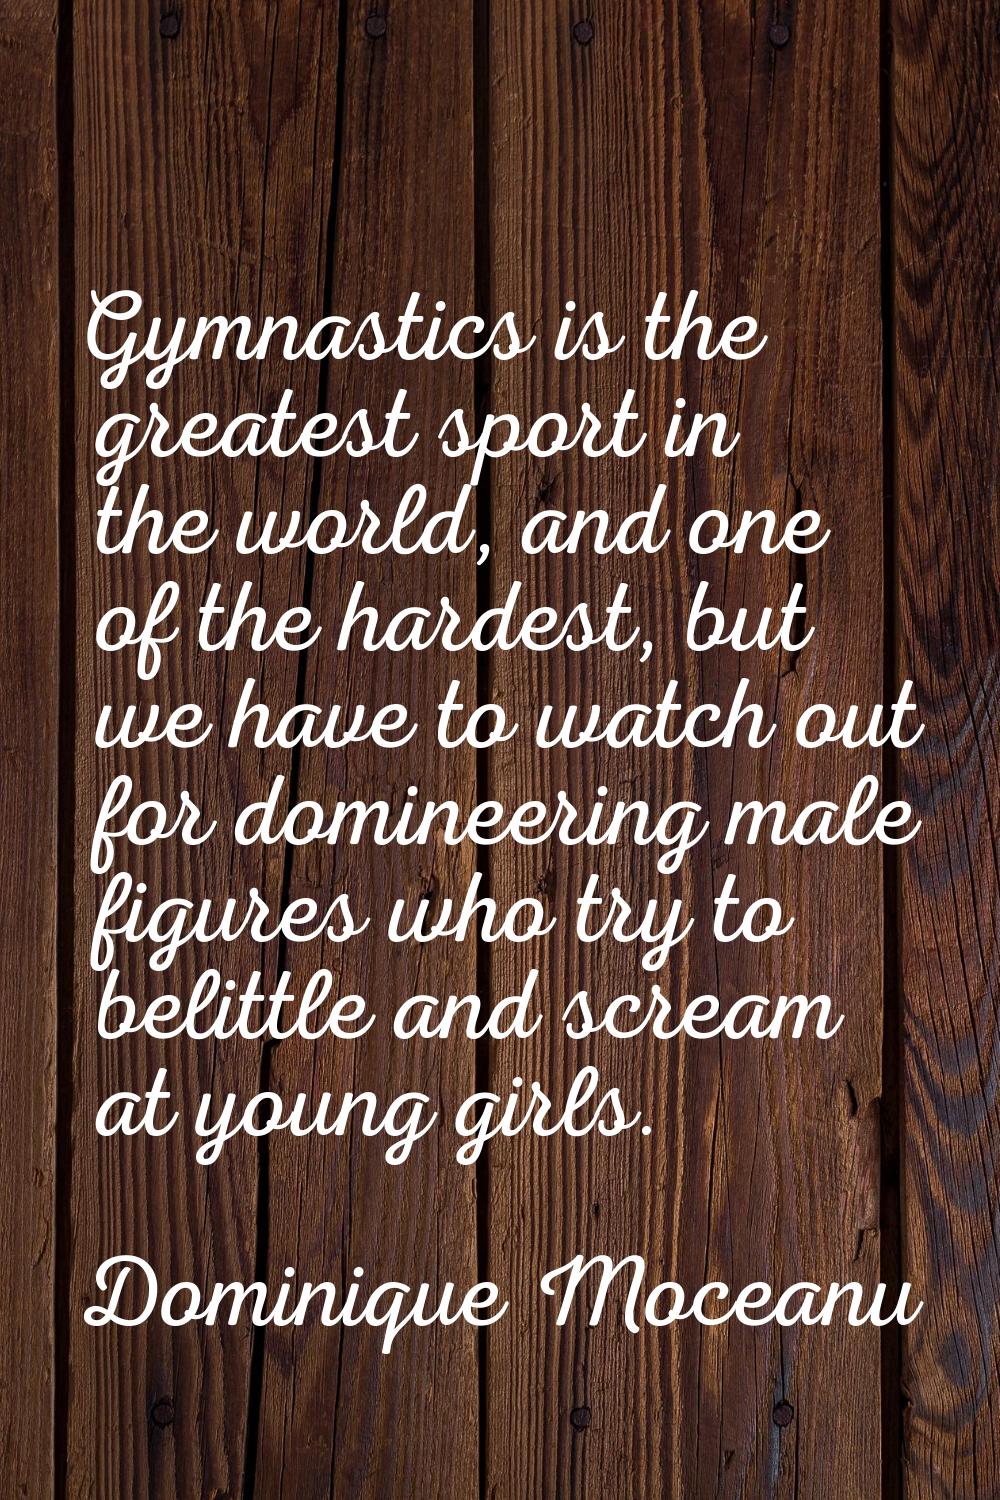 Gymnastics is the greatest sport in the world, and one of the hardest, but we have to watch out for